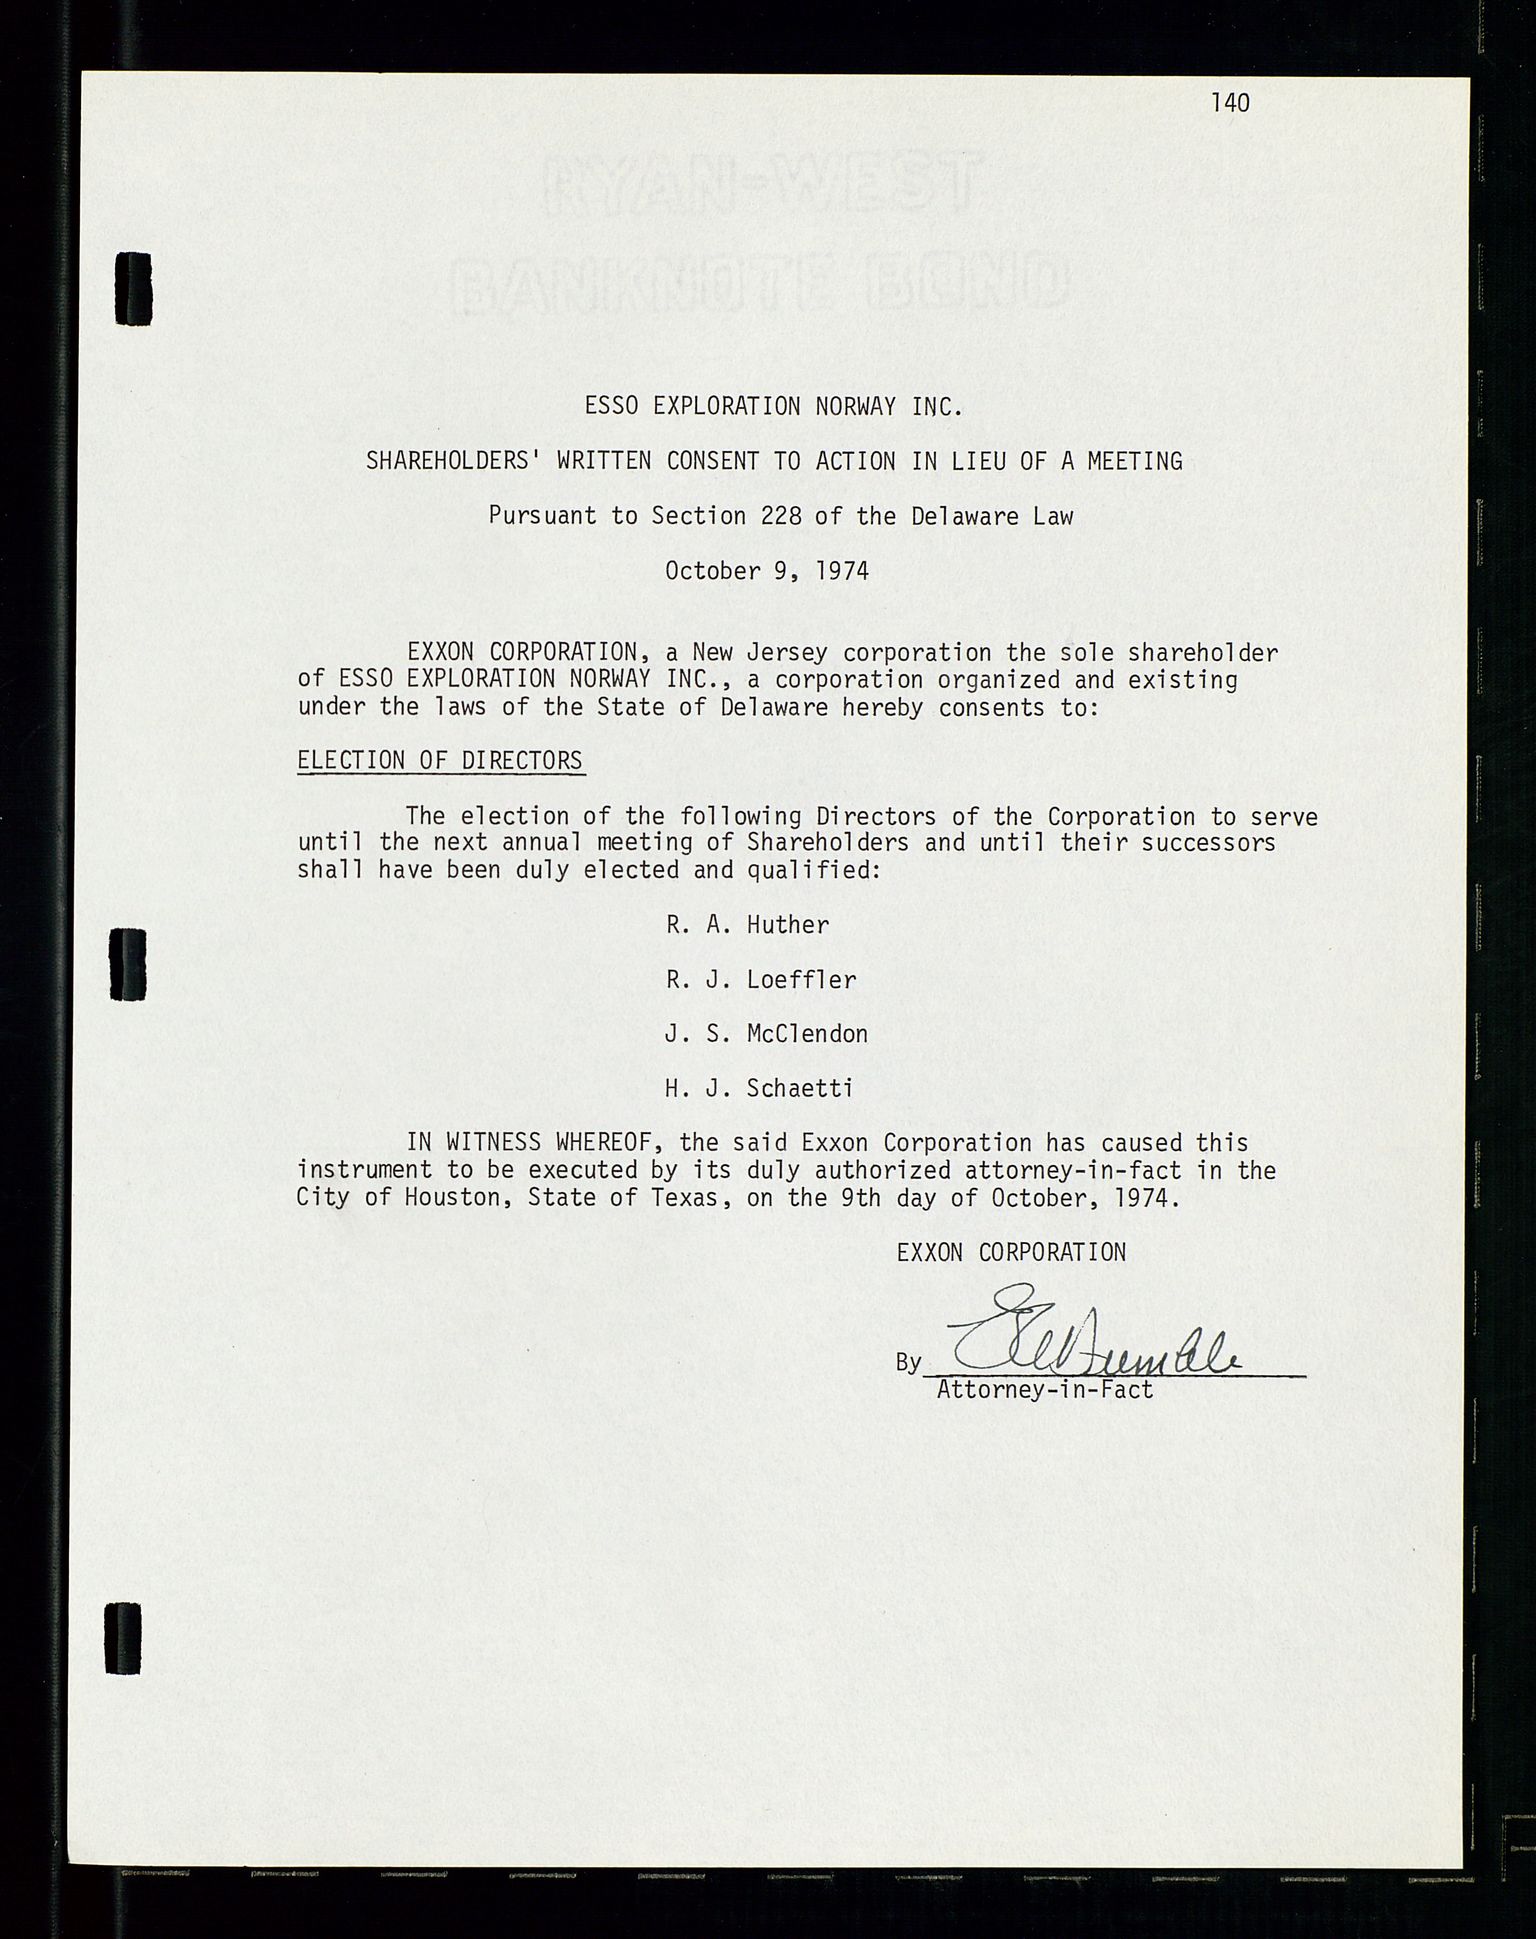 Pa 1512 - Esso Exploration and Production Norway Inc., SAST/A-101917/A/Aa/L0001/0001: Styredokumenter / Corporate records, By-Laws, Board meeting minutes, Incorporations, 1965-1975, s. 140